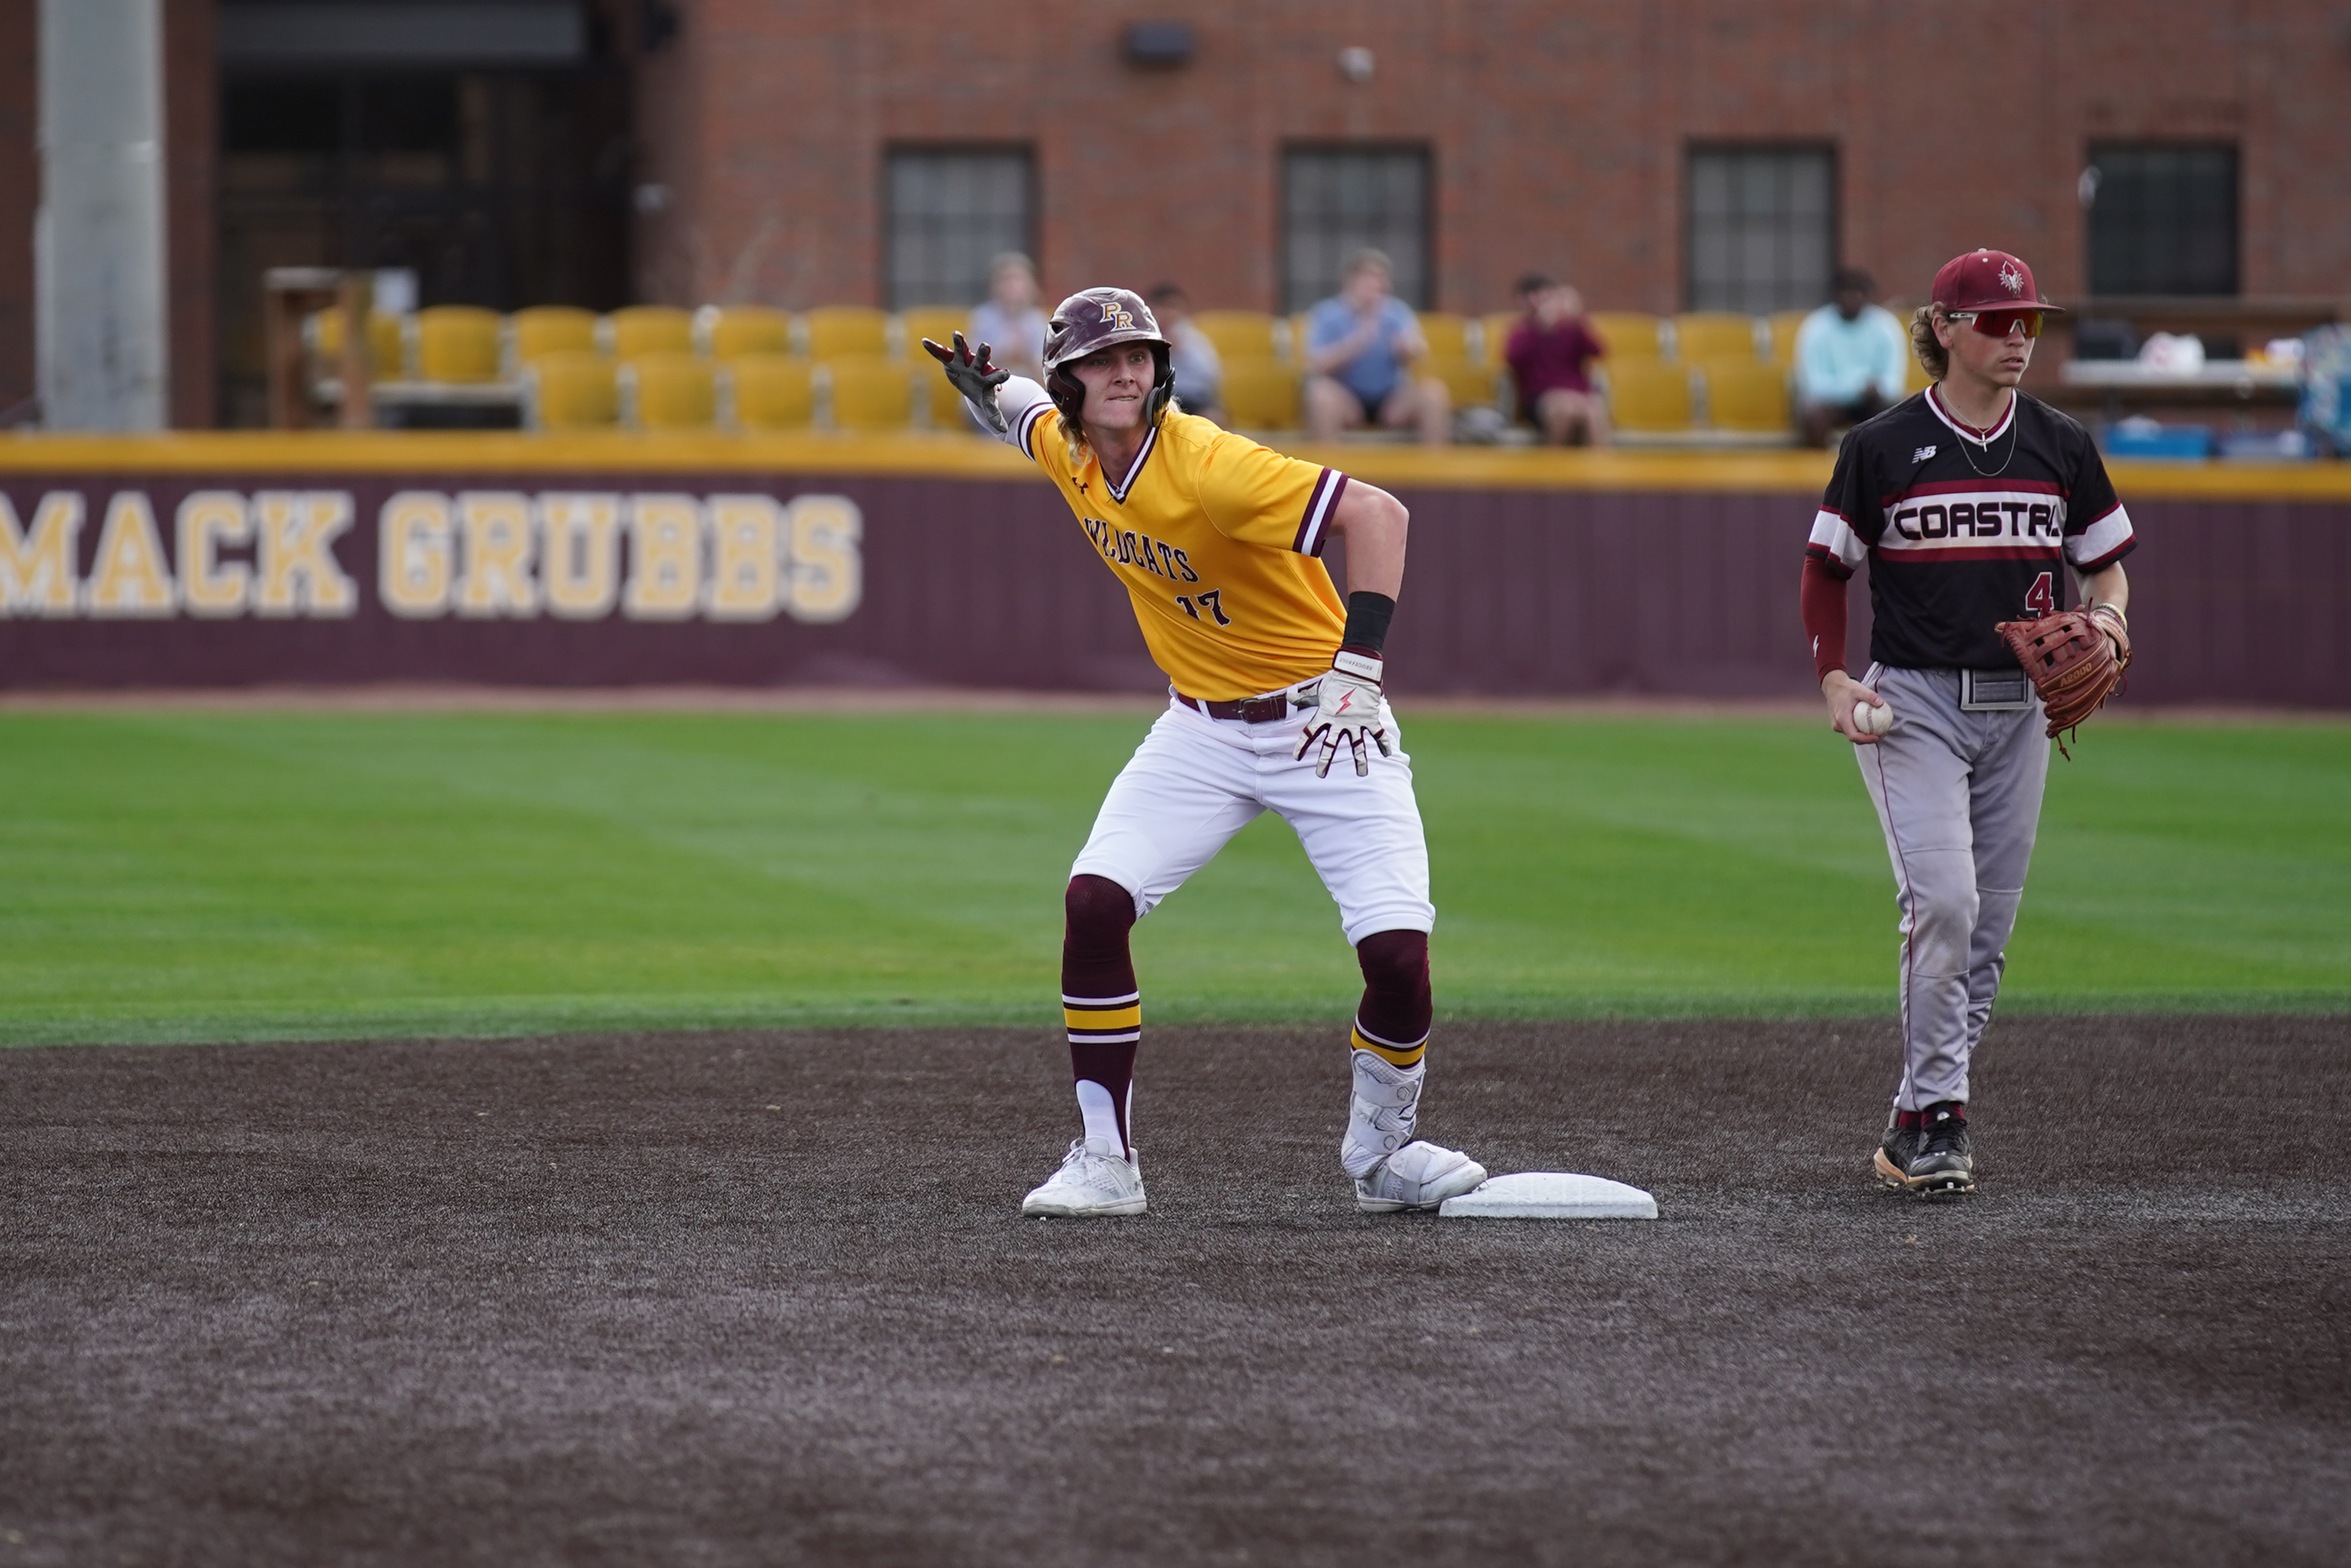 Well-rounded performance leads No. 1 PRCC to sweep of Baton Rouge 